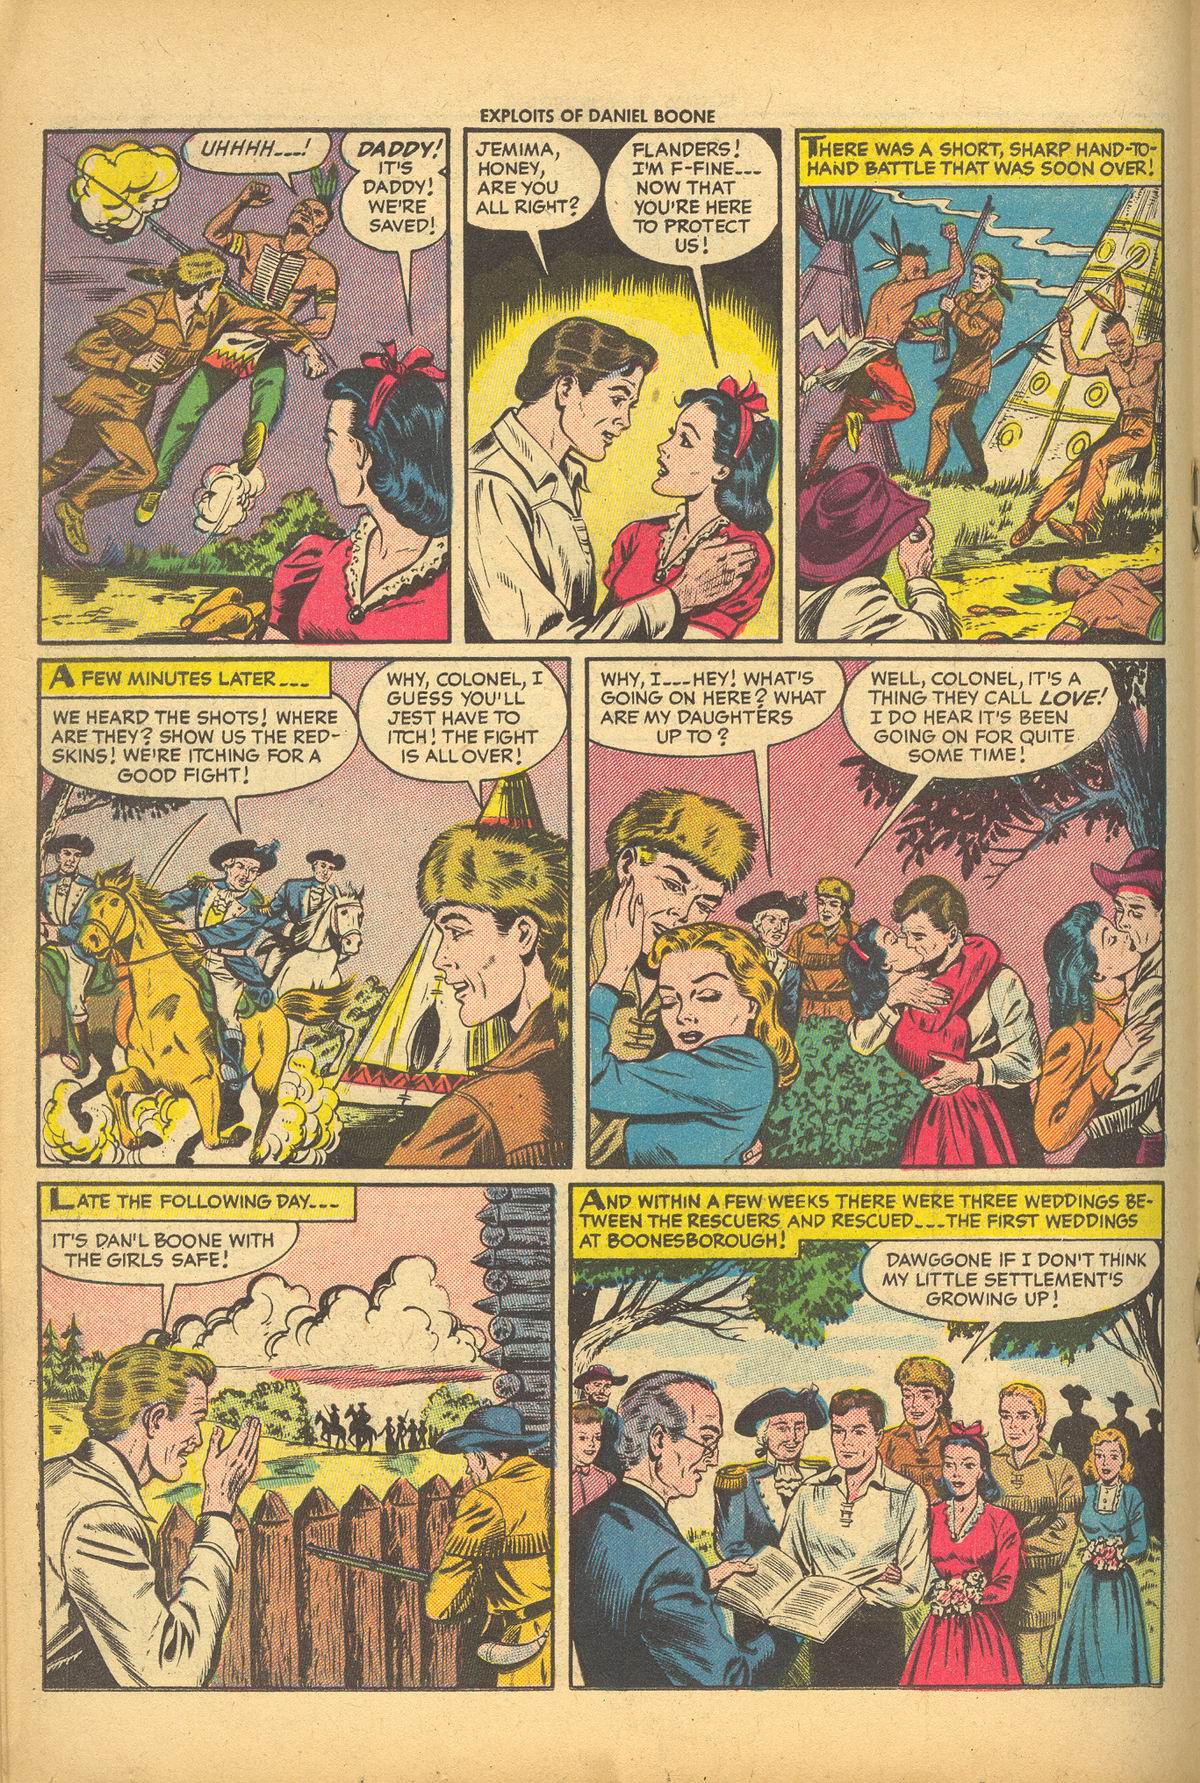 Read online Exploits of Daniel Boone comic -  Issue #3 - 18